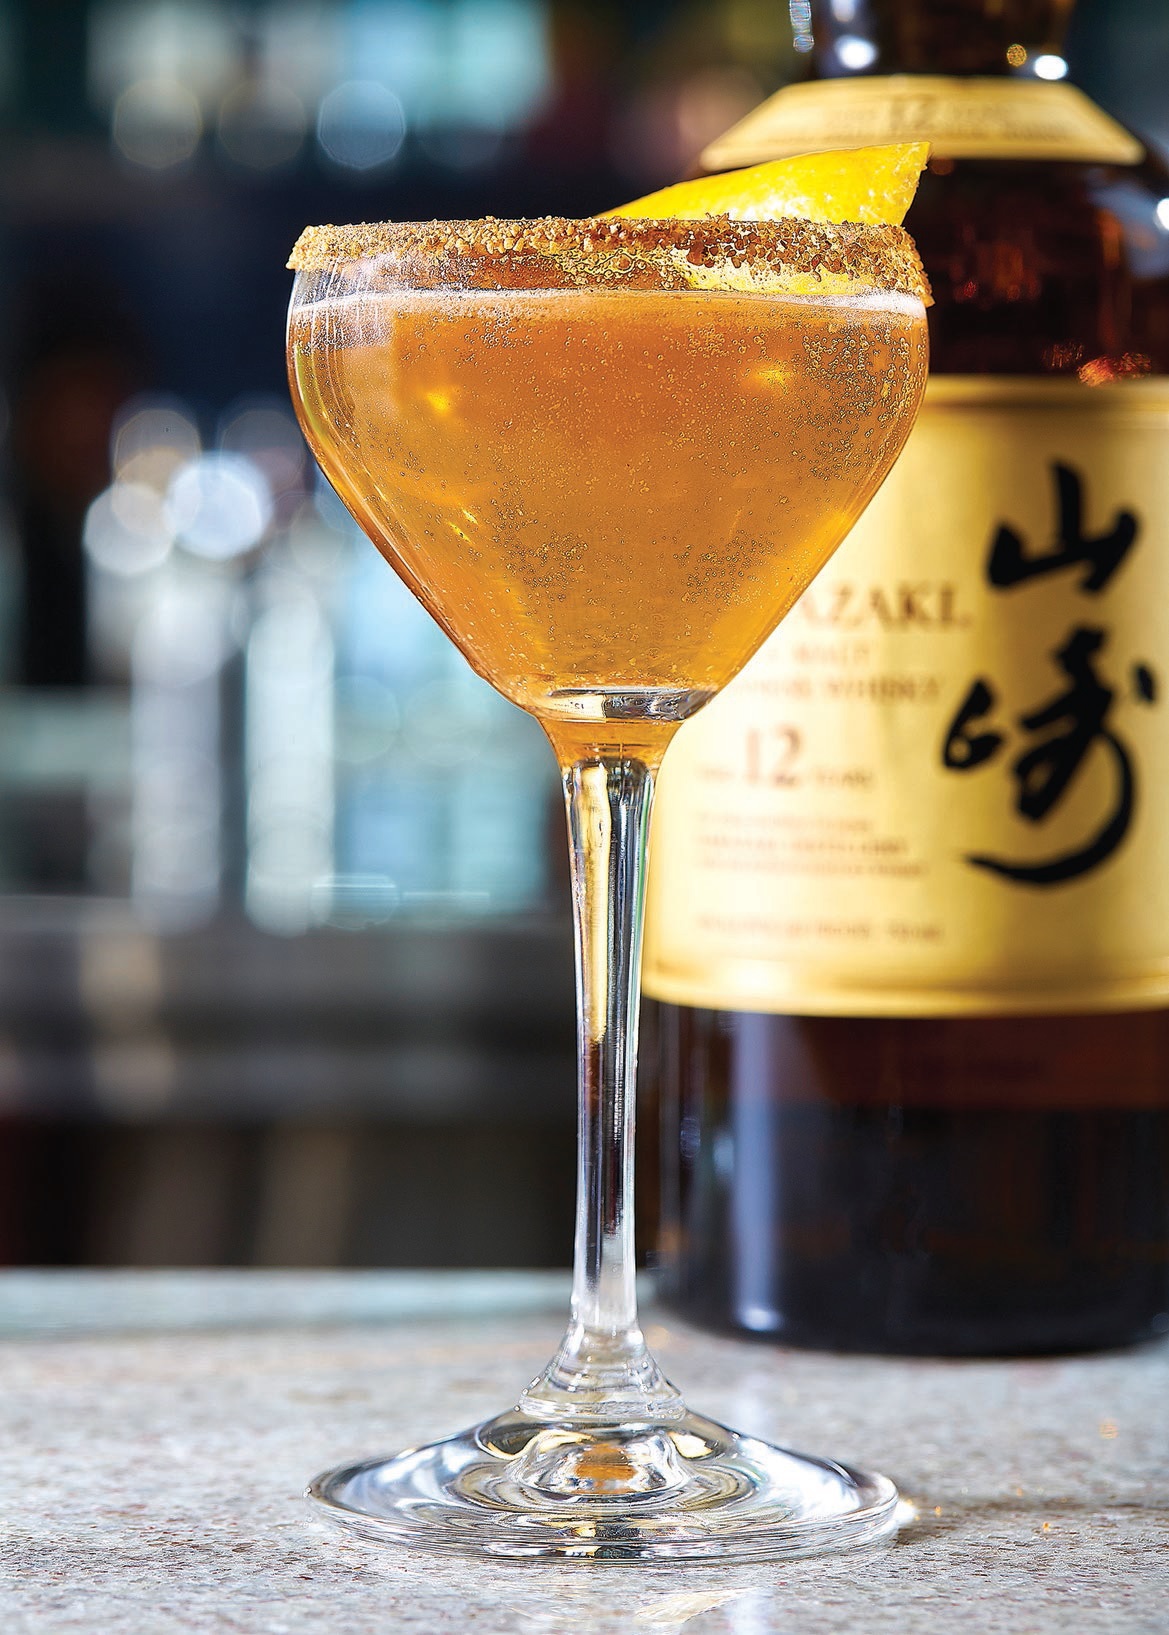 Round out the day with one of Tei-An’s expertly crafted cocktails. PHOTO COURTESY OF BRAND